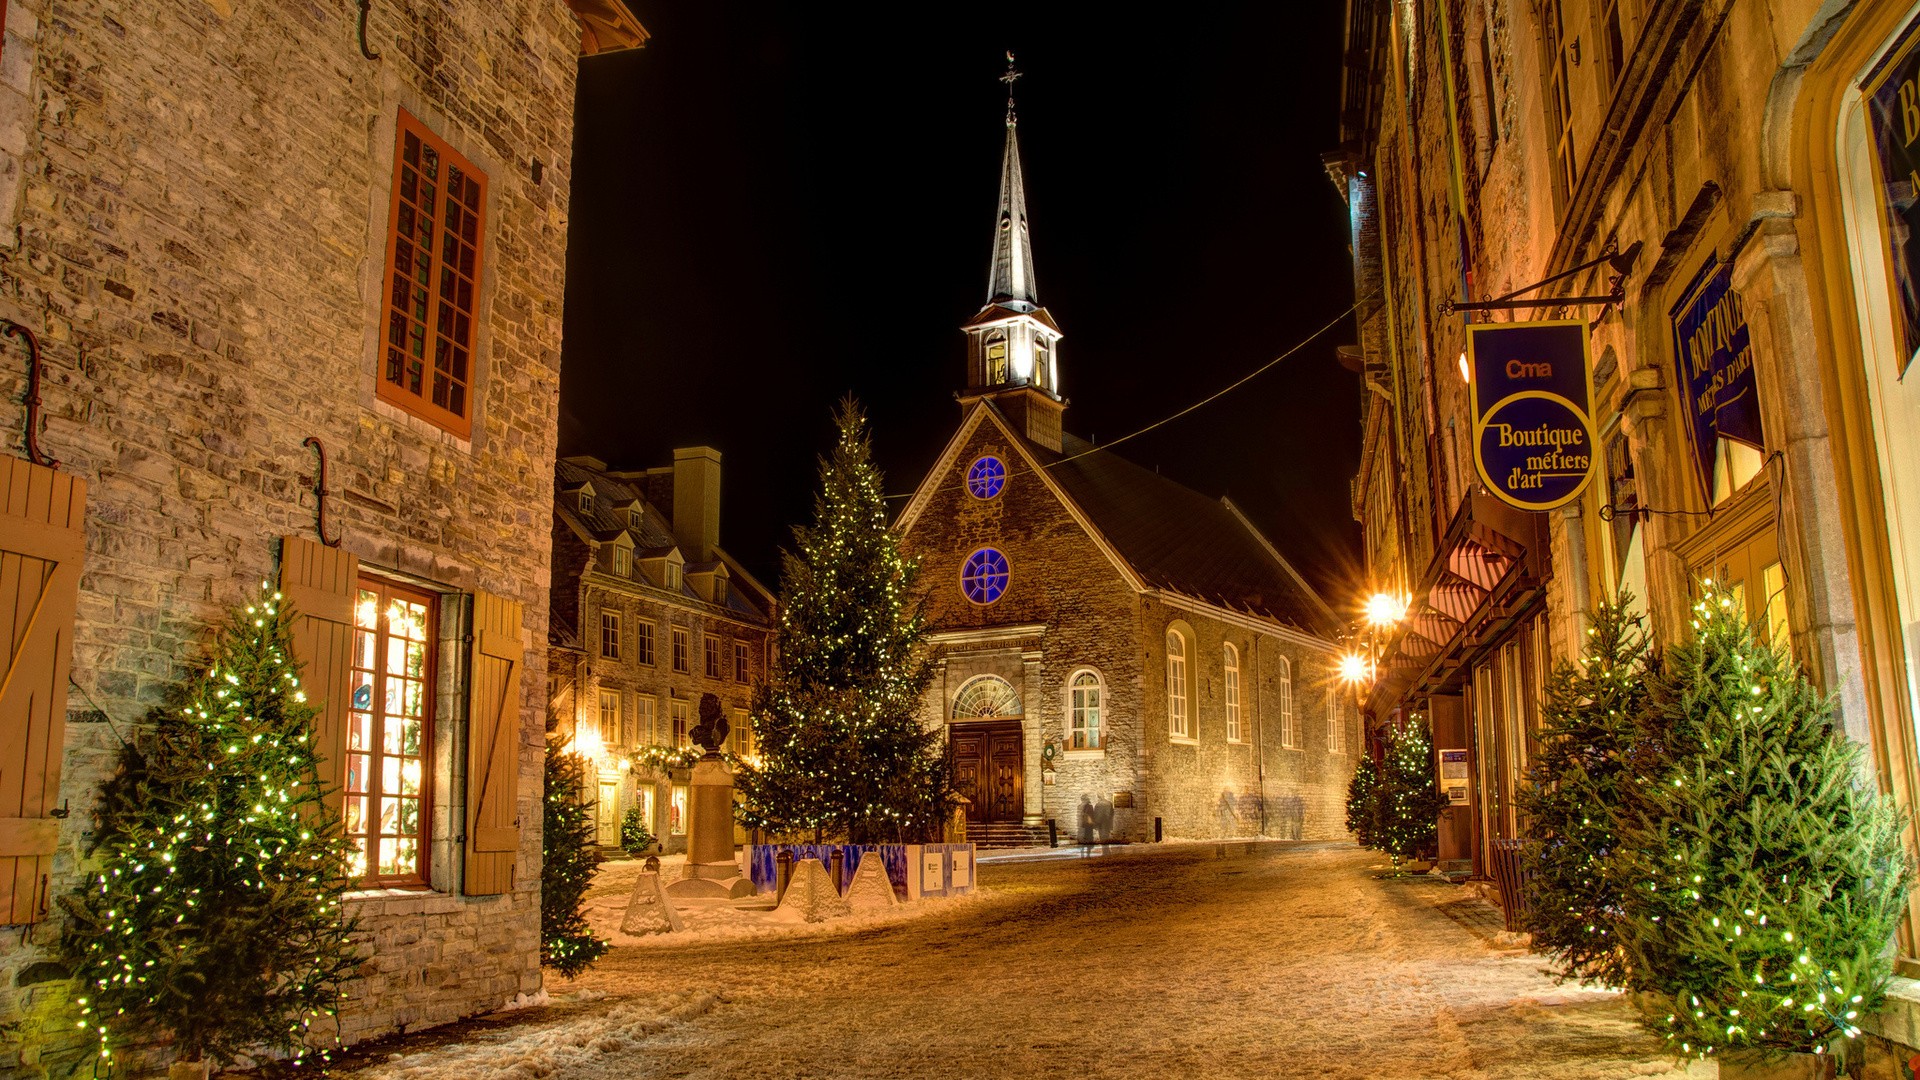 General 1920x1080 architecture city town building old building history tower street window house Quebec Canada Christmas trees lights Christmas tree Christmas lights winter church long exposure night snow